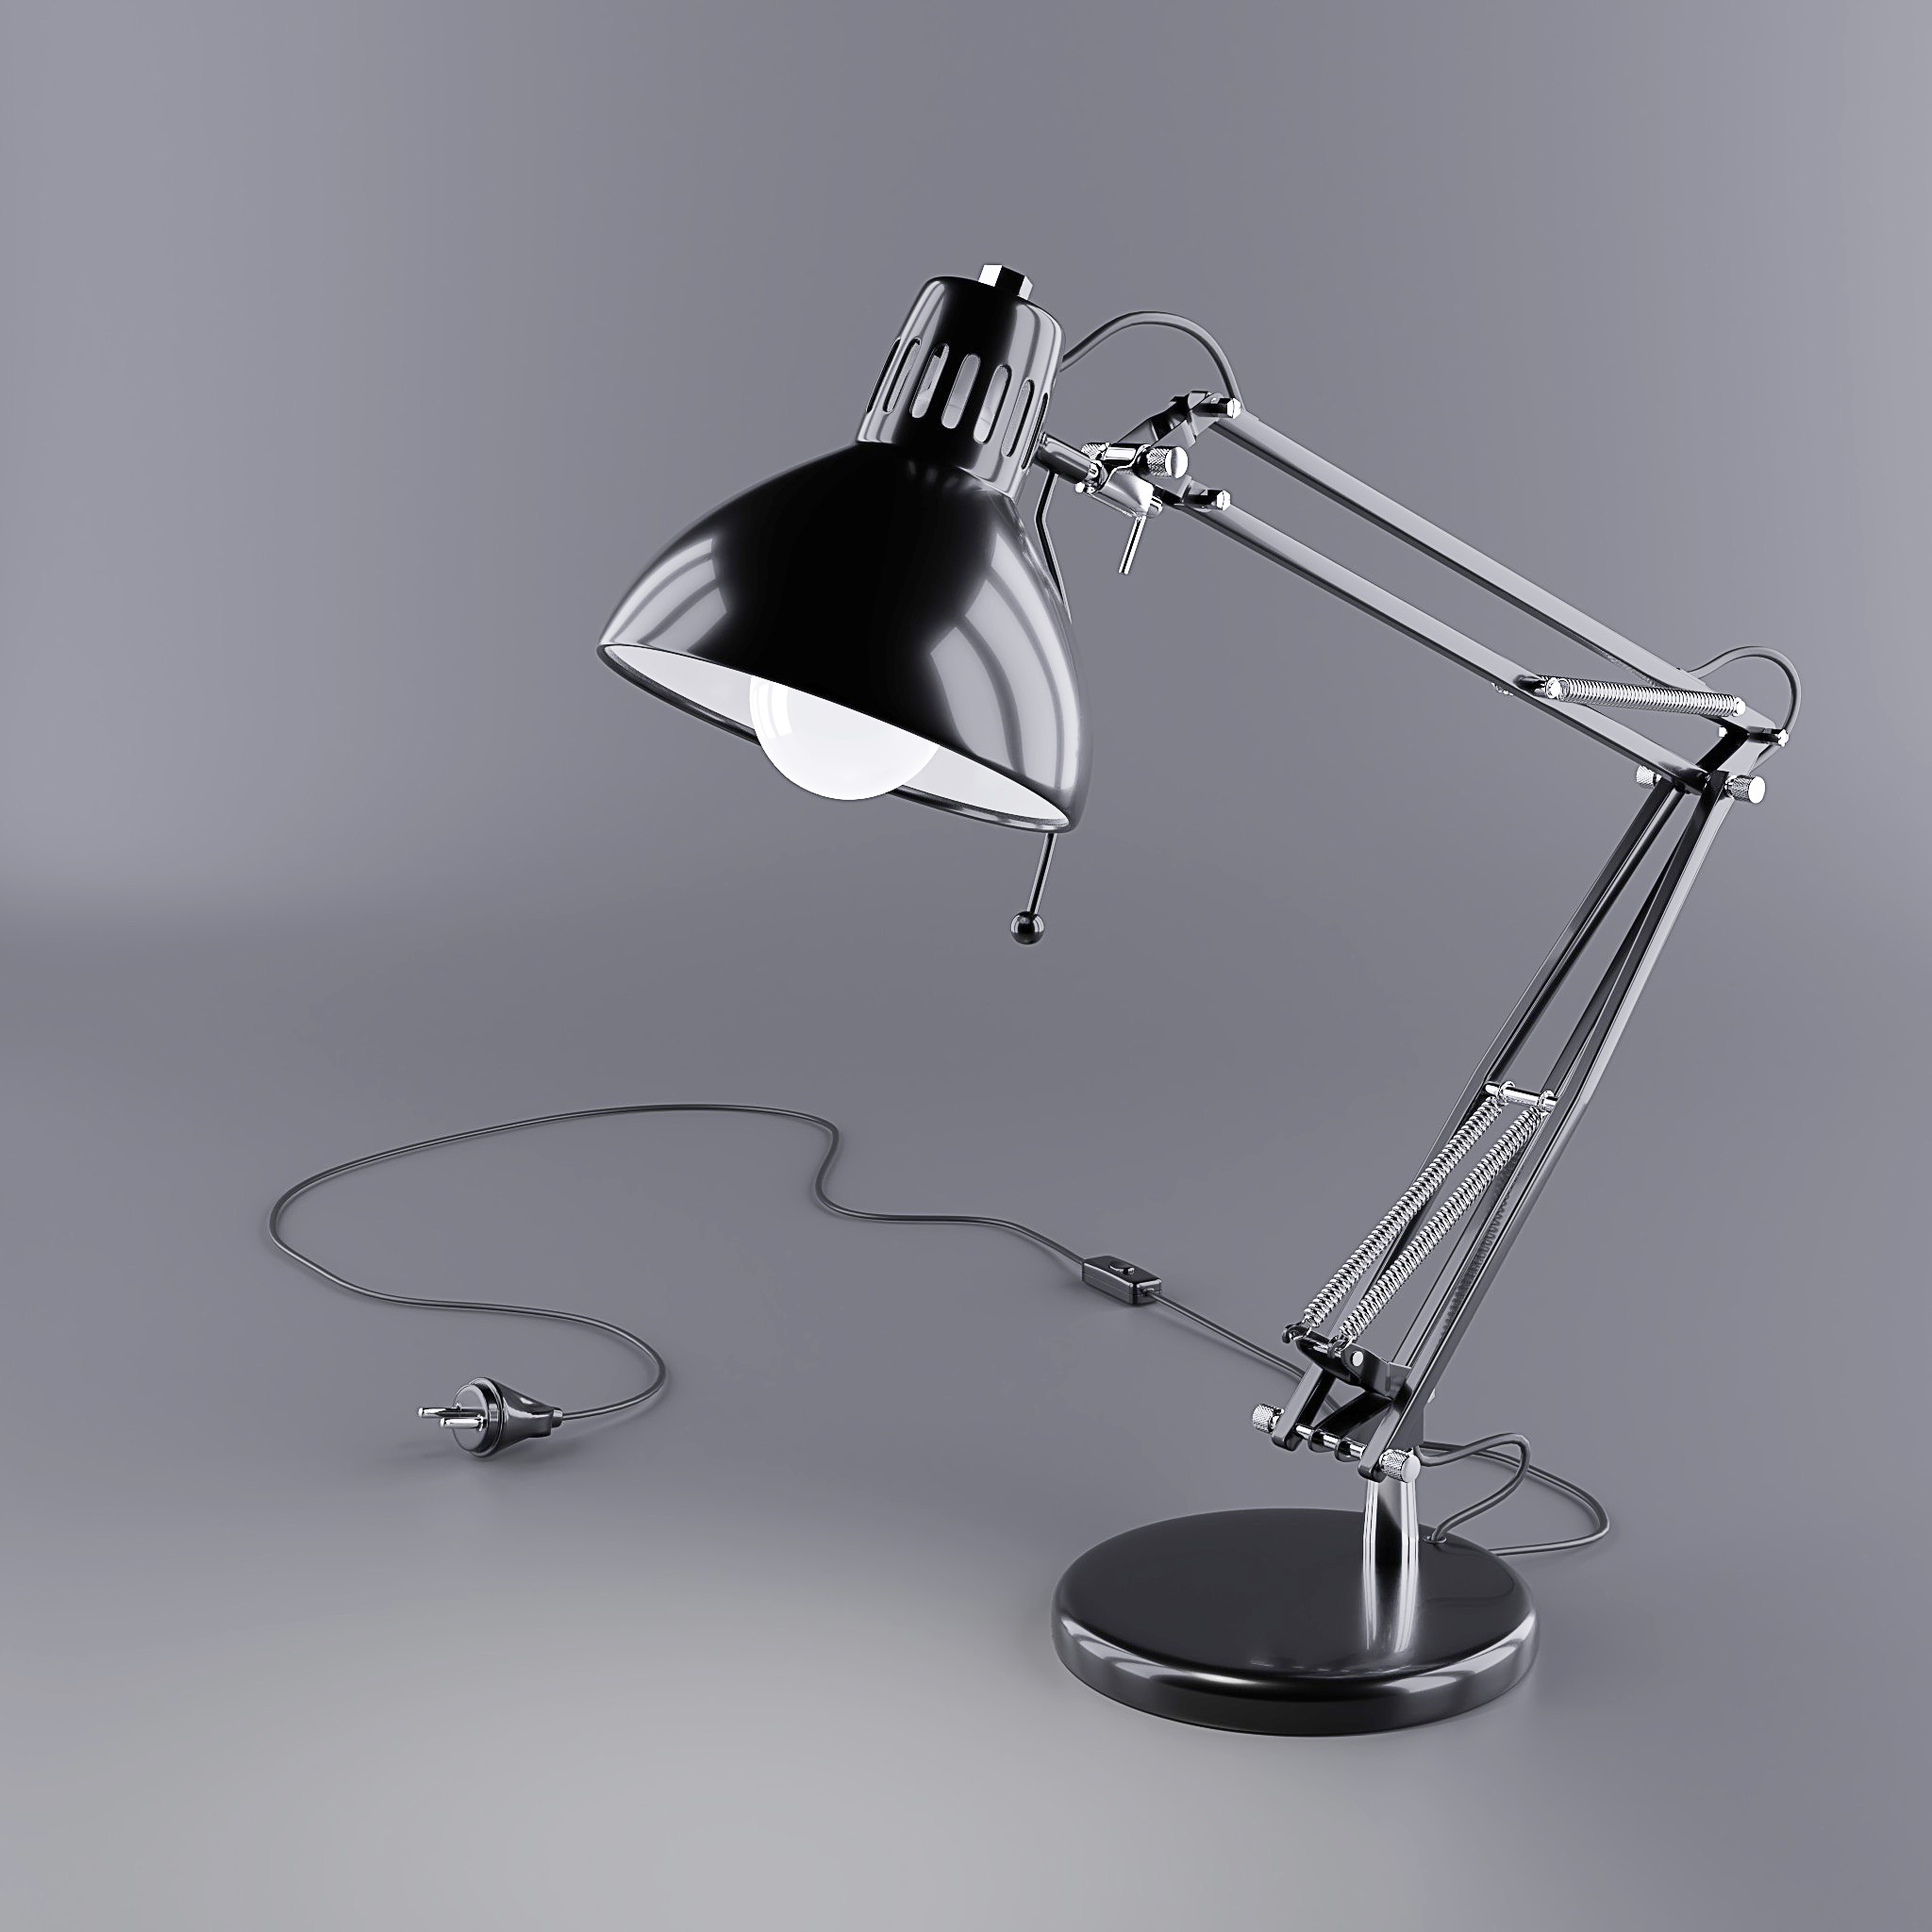 Little Lamp preview image 1